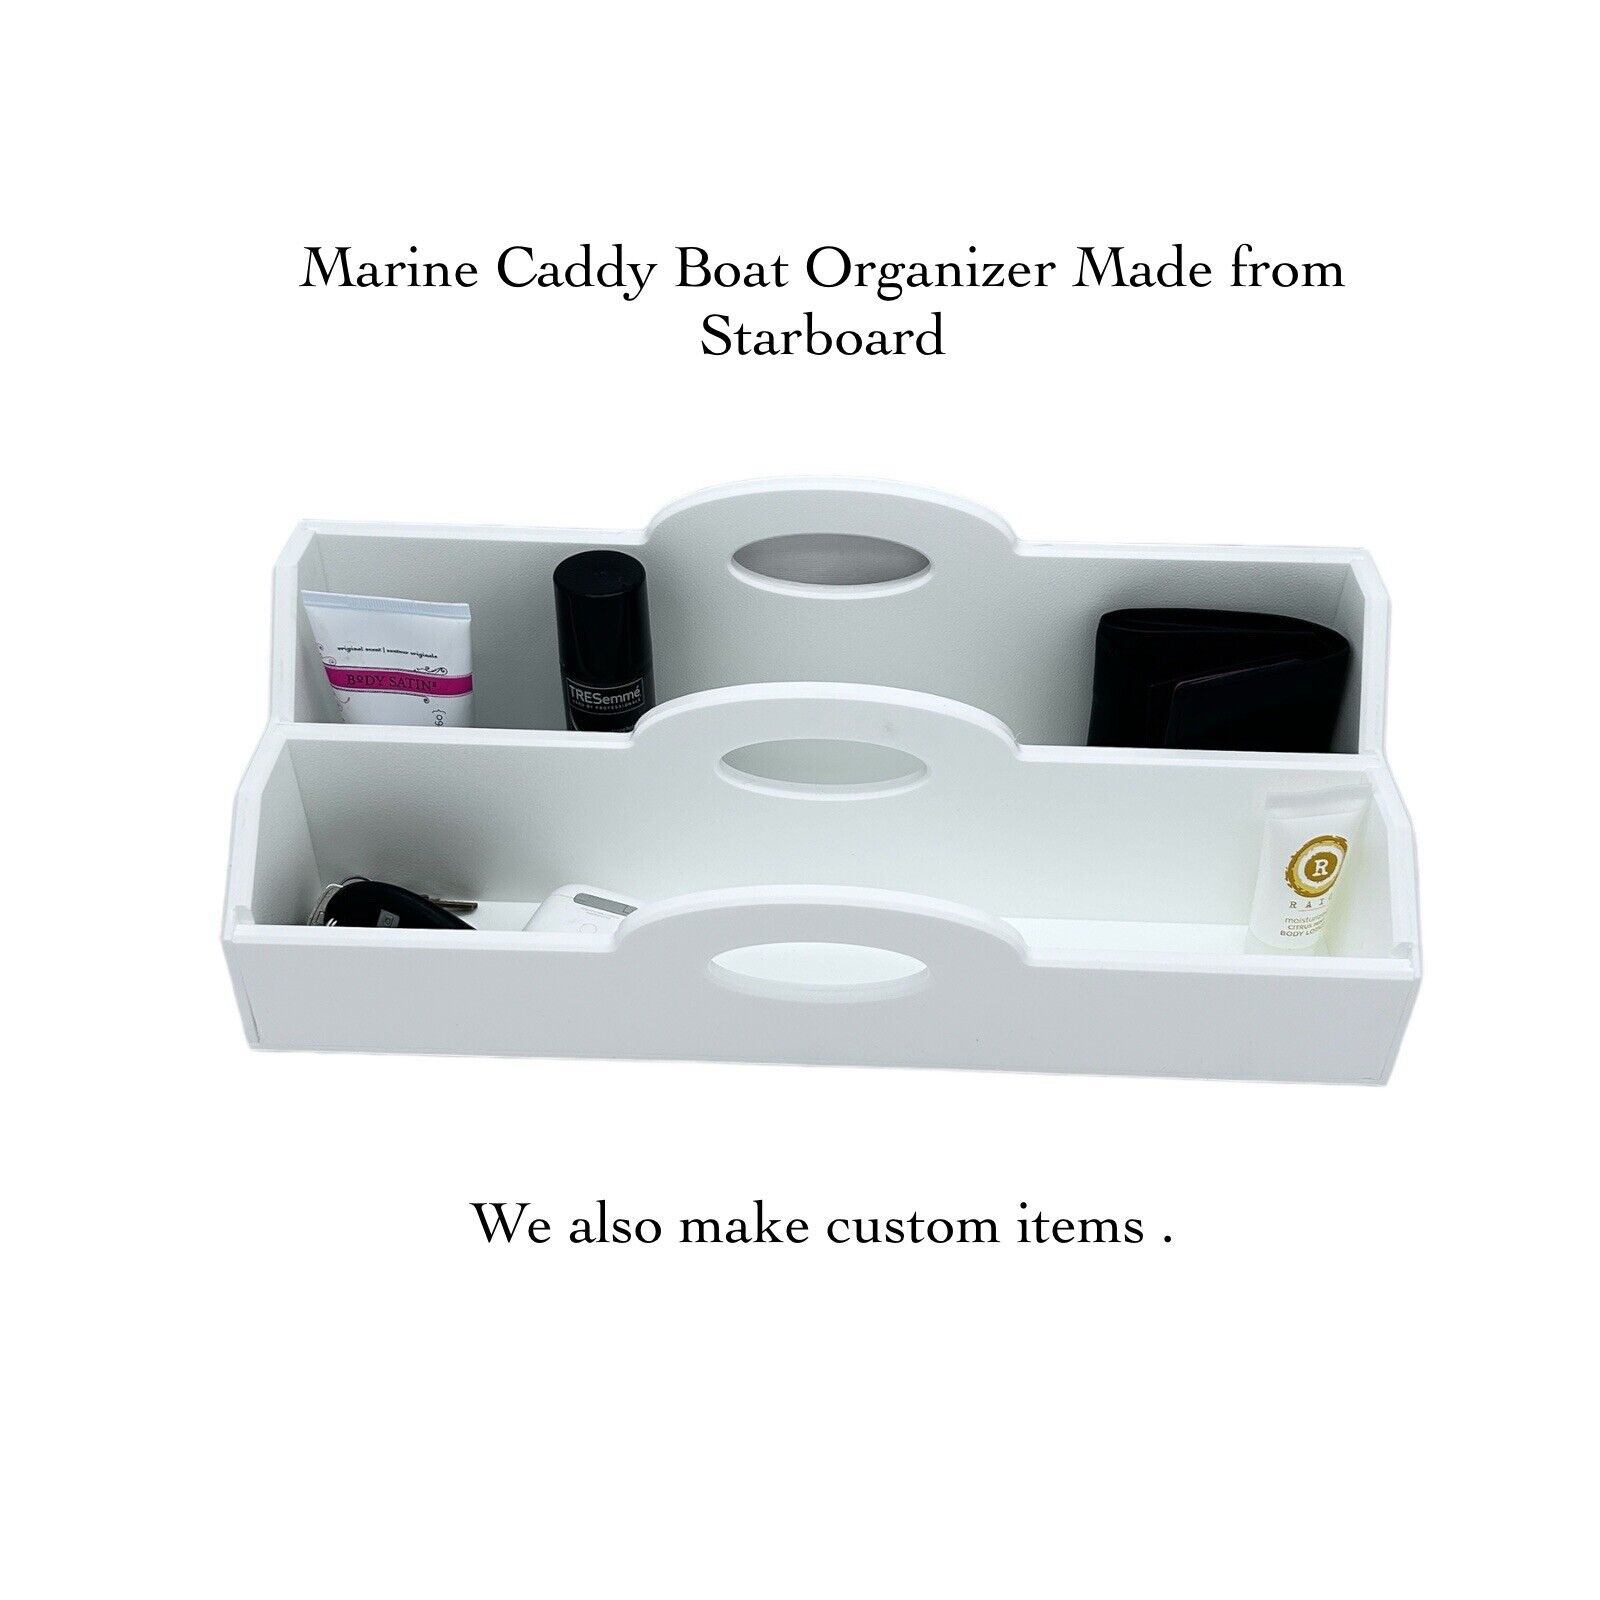 Boat Caddy Organizer, Marine Starboard , Two Tiers Levels